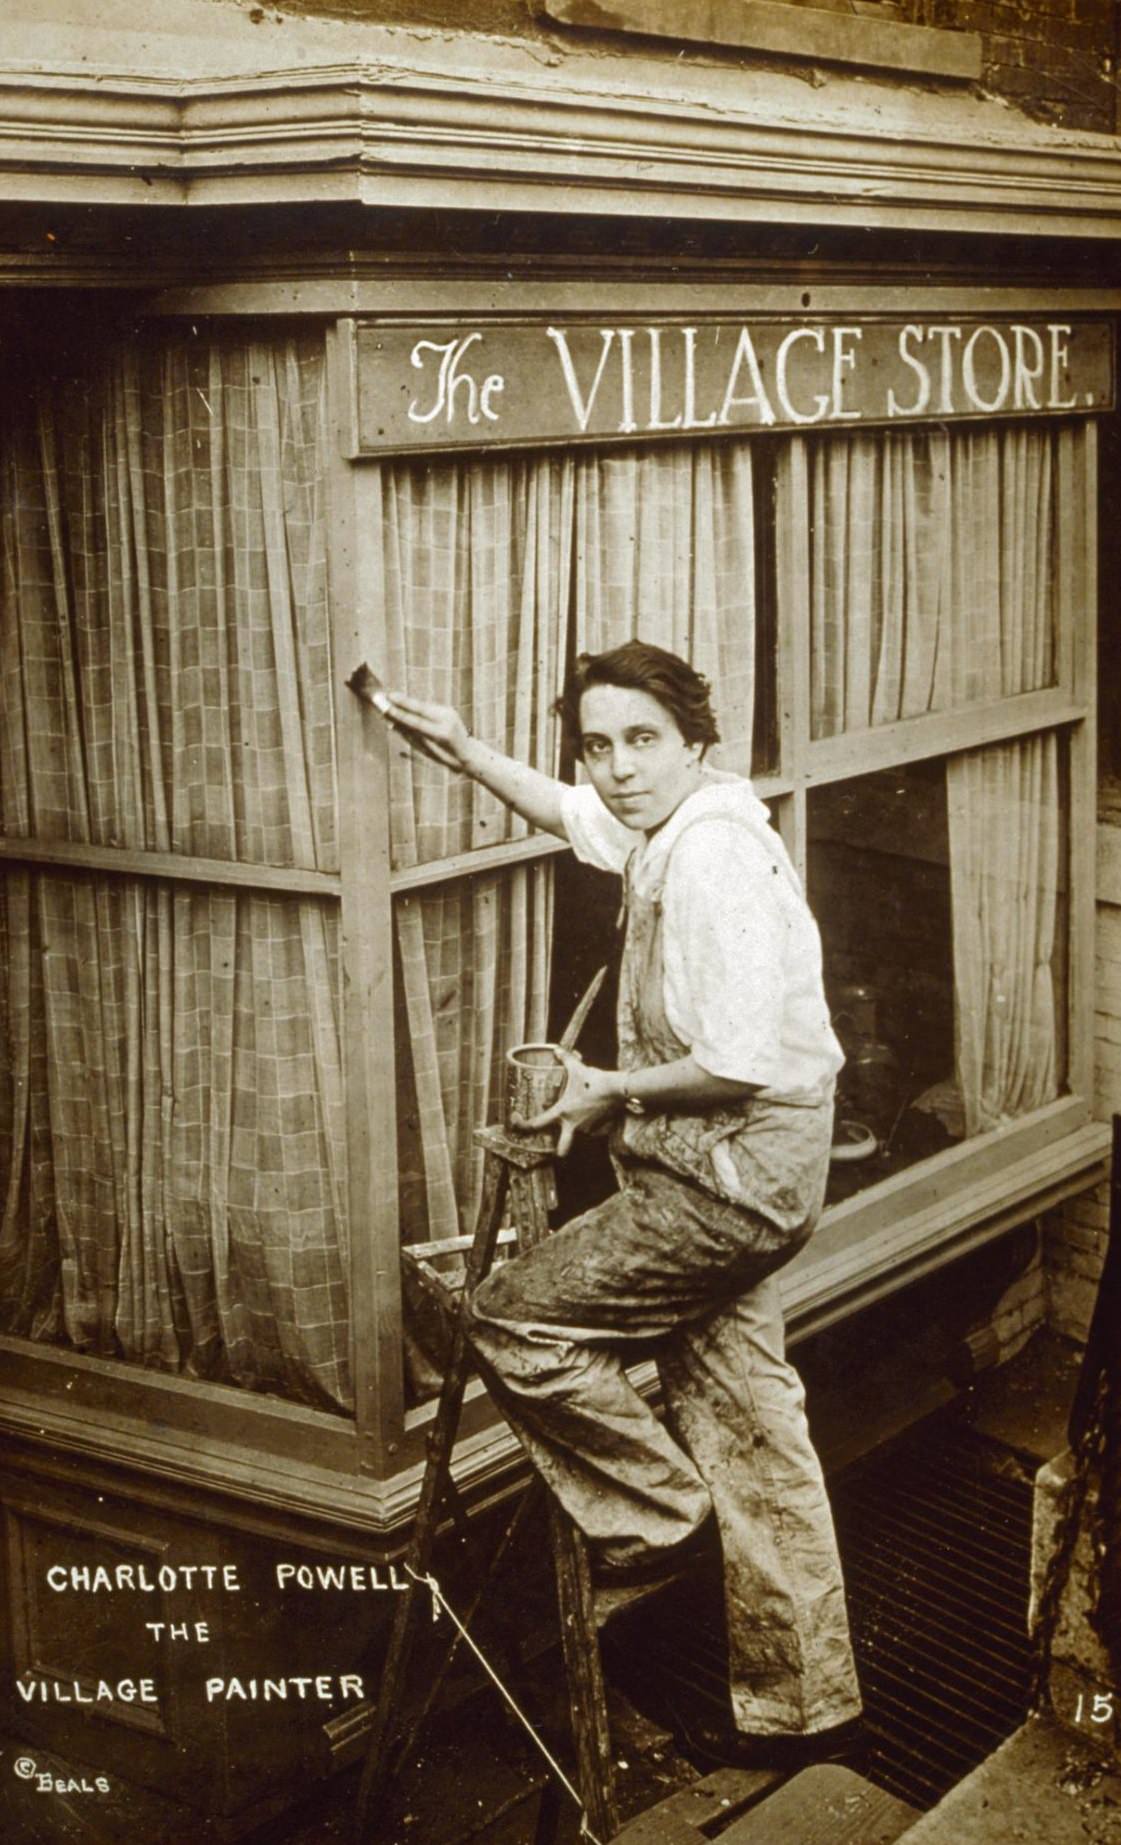 Portrait Of Charlotte Powell Standing On A Ladder And Painting The Exterior Of The Village Store, Sheridan Square, 1926